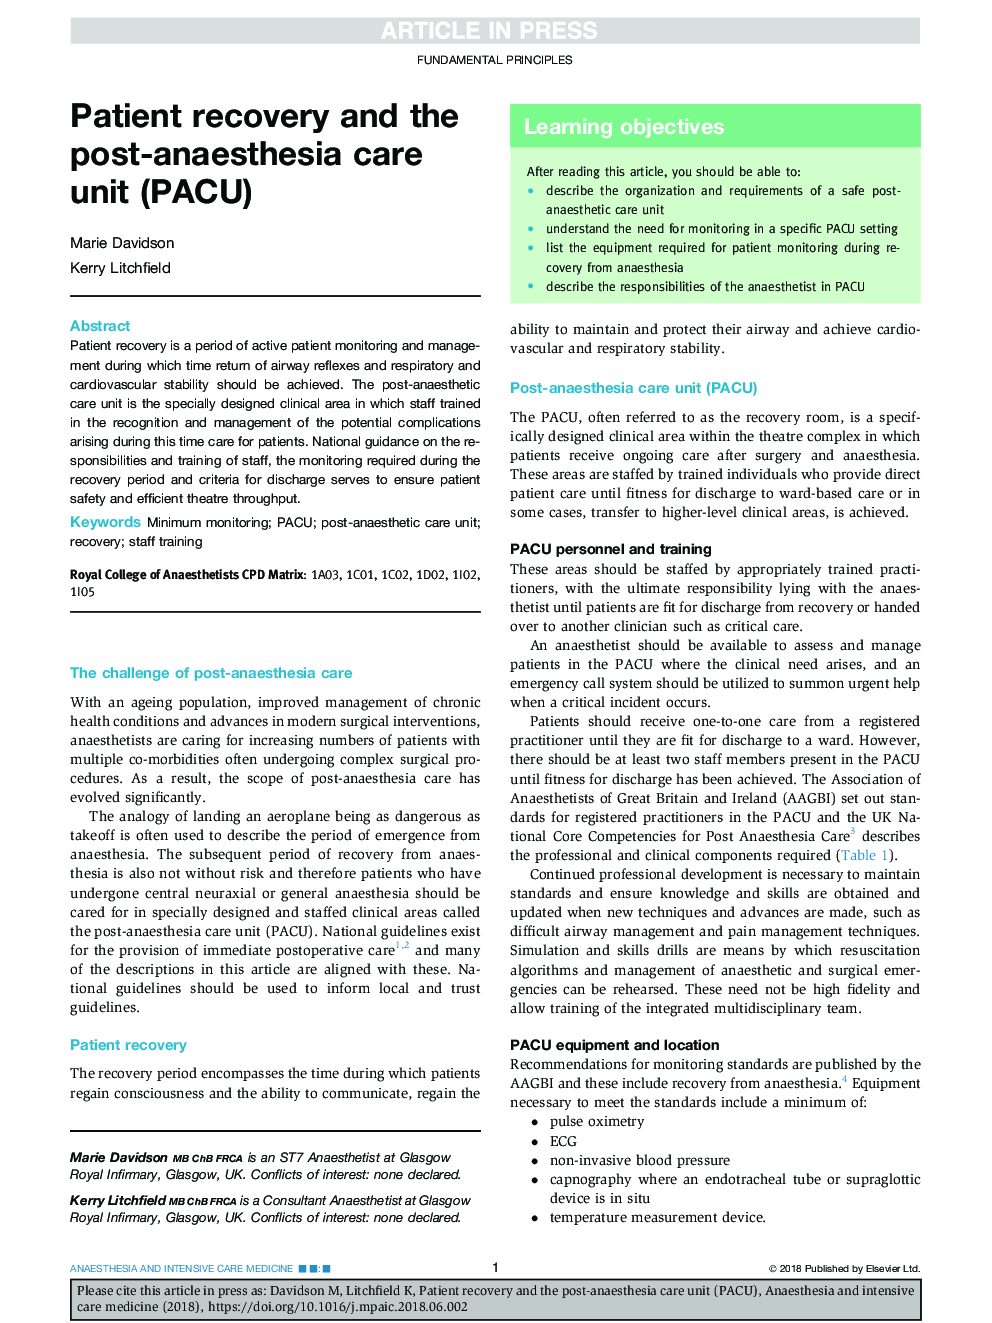 Patient recovery and the post-anaesthesia care unit (PACU)